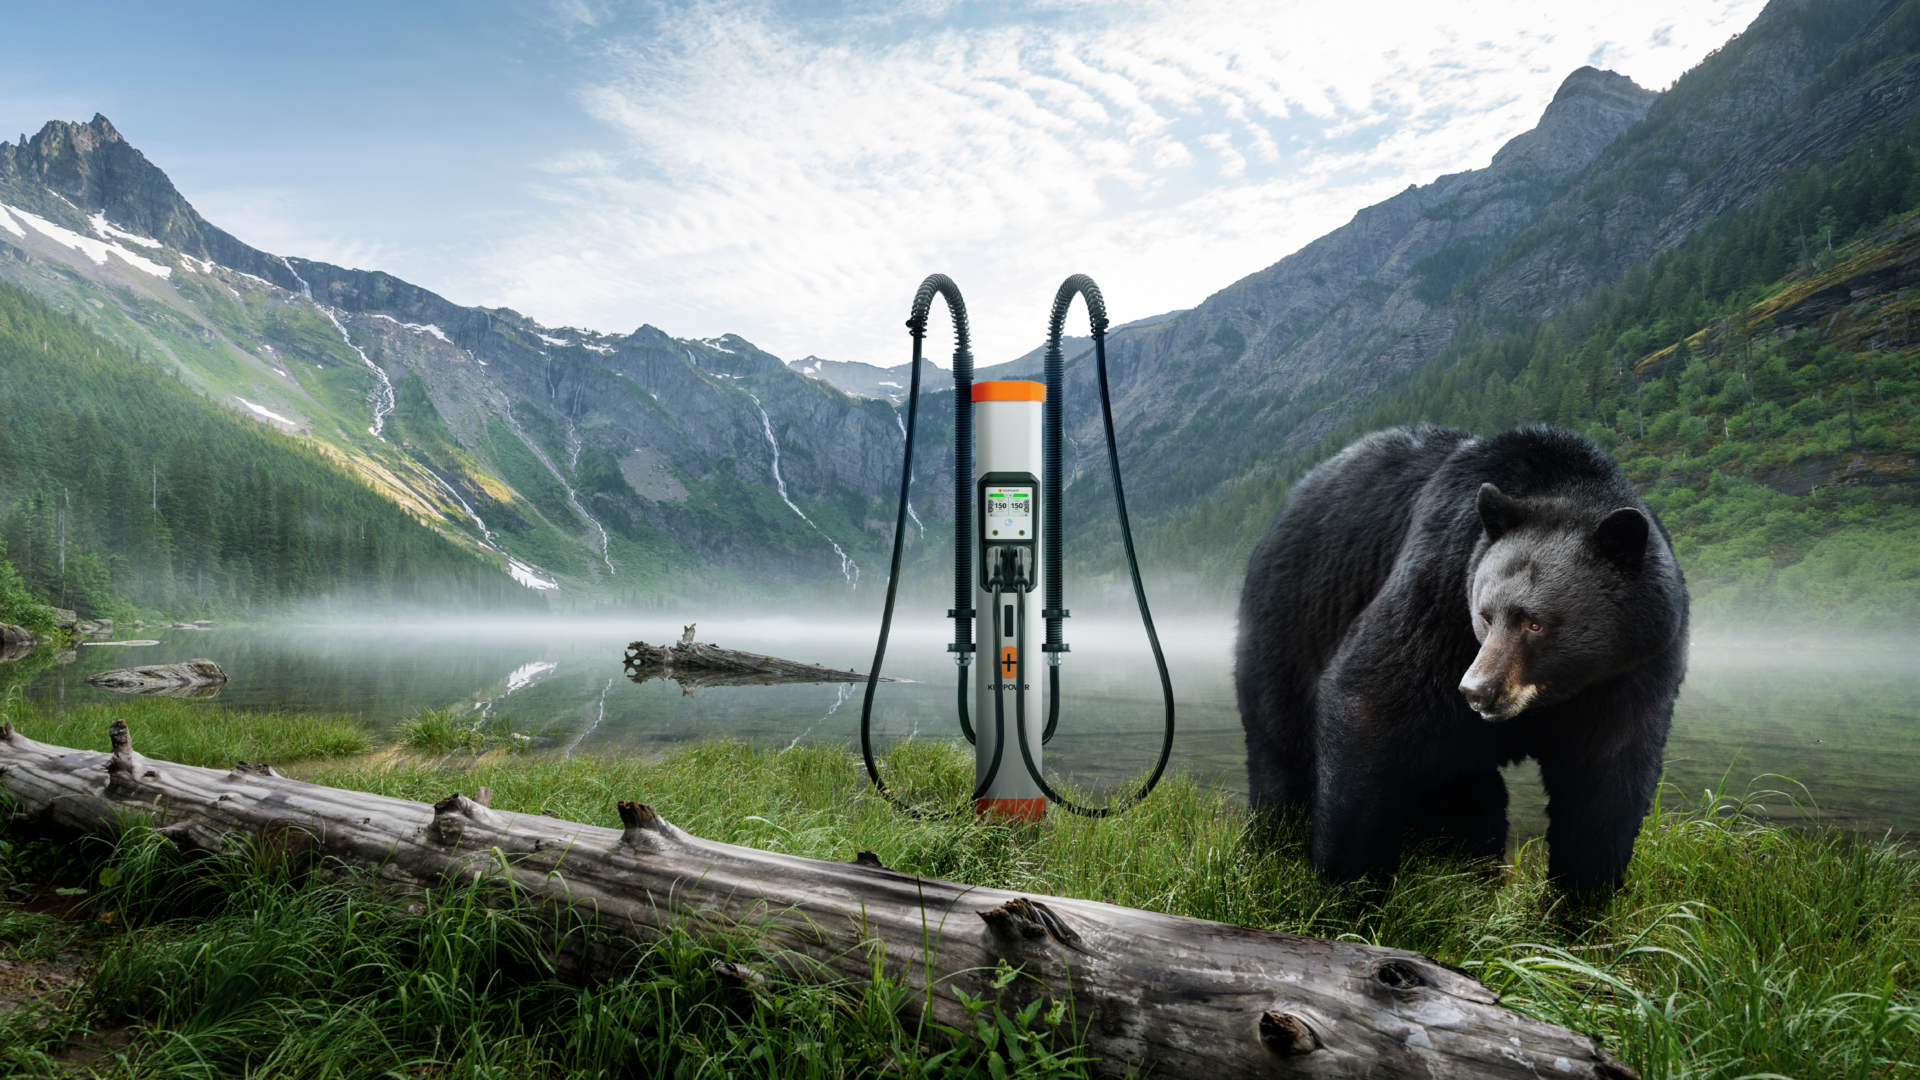 Image of Kempower Satellite in the mountains with a bear nearby